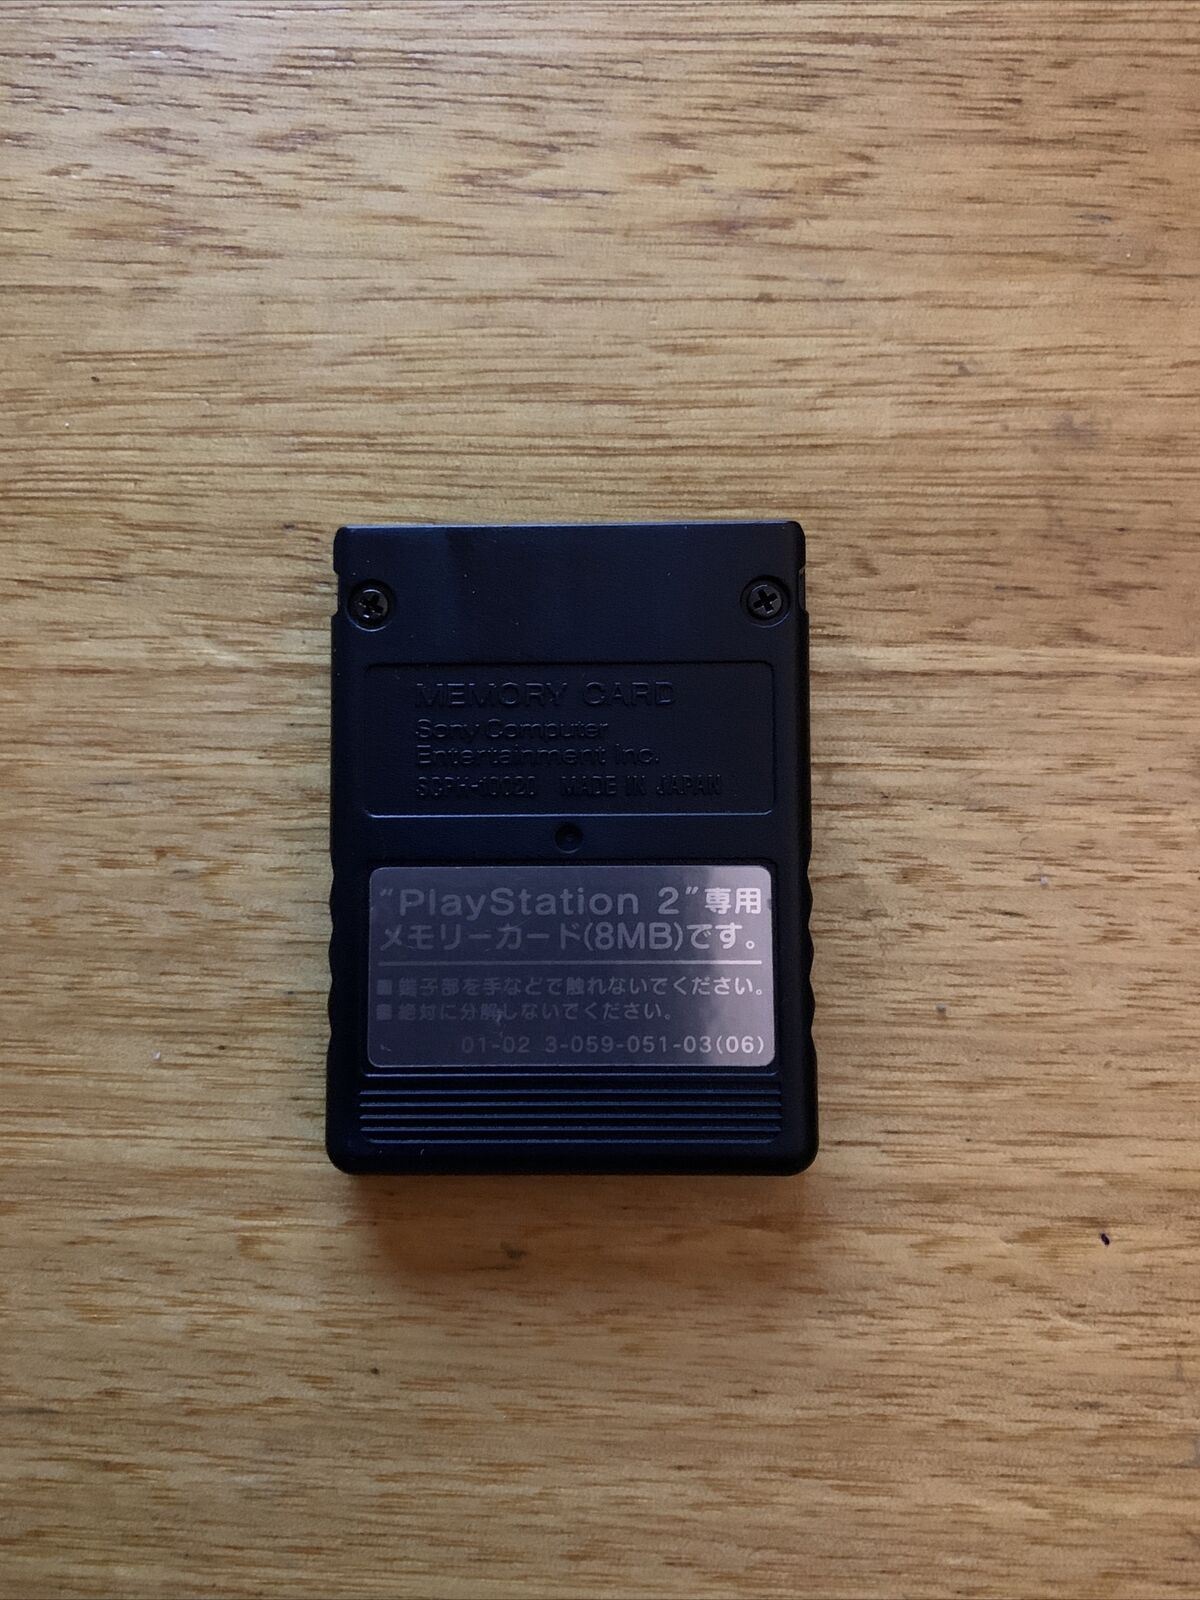 Genuine Sony SCPH10020 PlayStation 2 8MB Memory Card